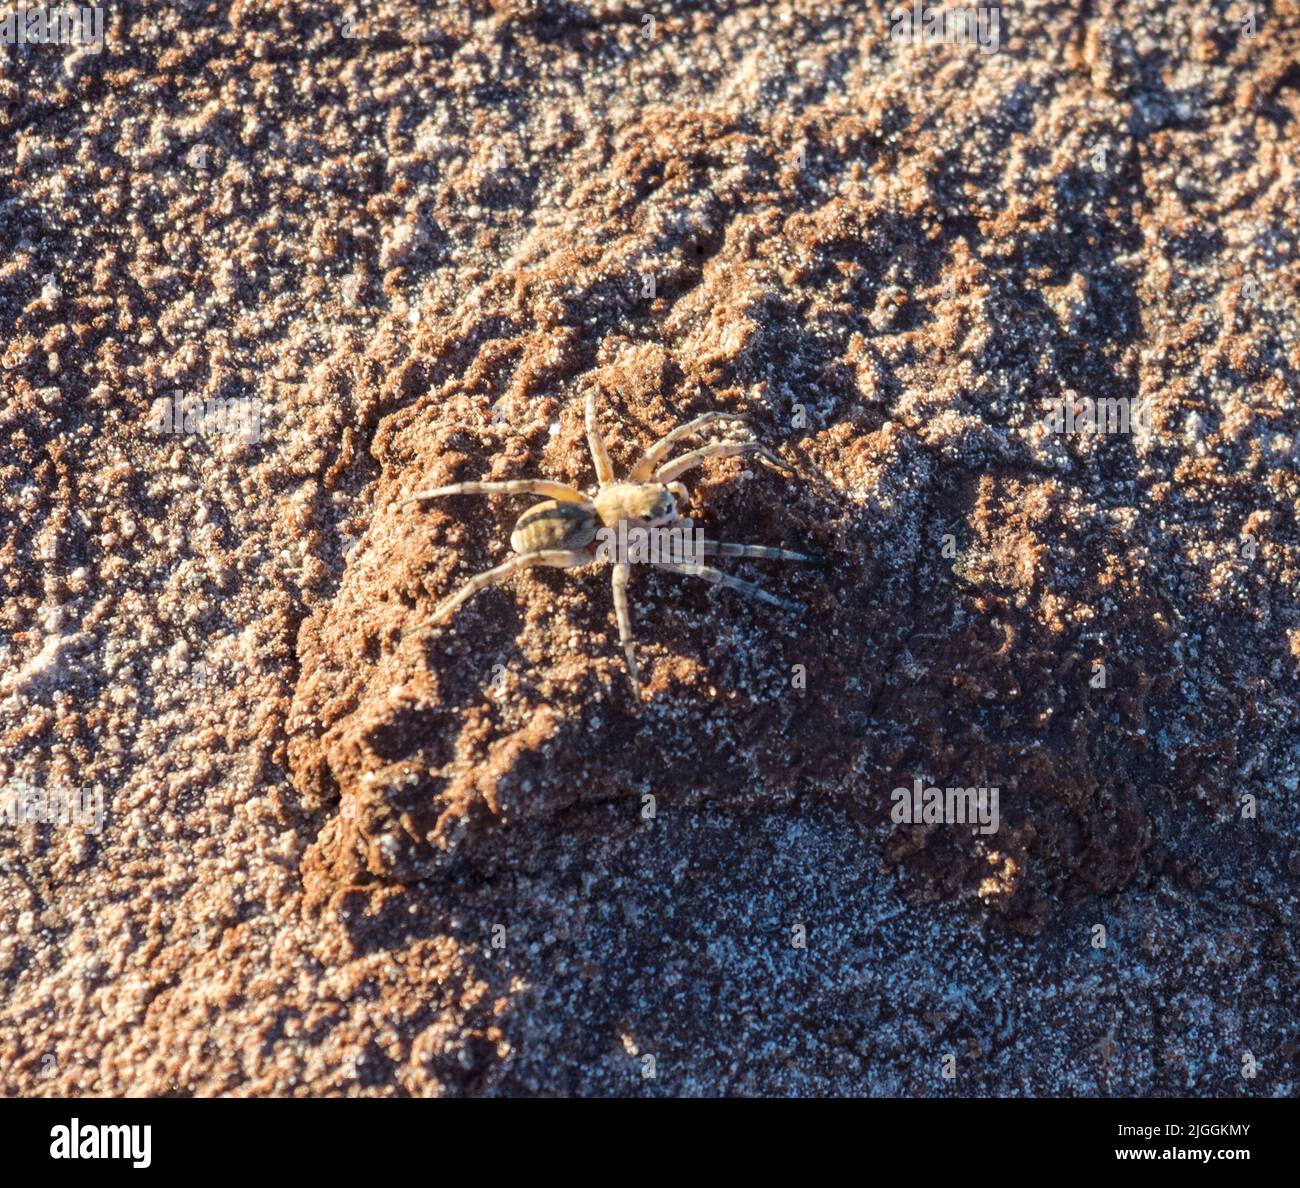 Wolf Spider (Tetralycosa alteripa?) on a small crest of mud in the dry salt bed of Lake Ballard, Western Australia. Stock Photo